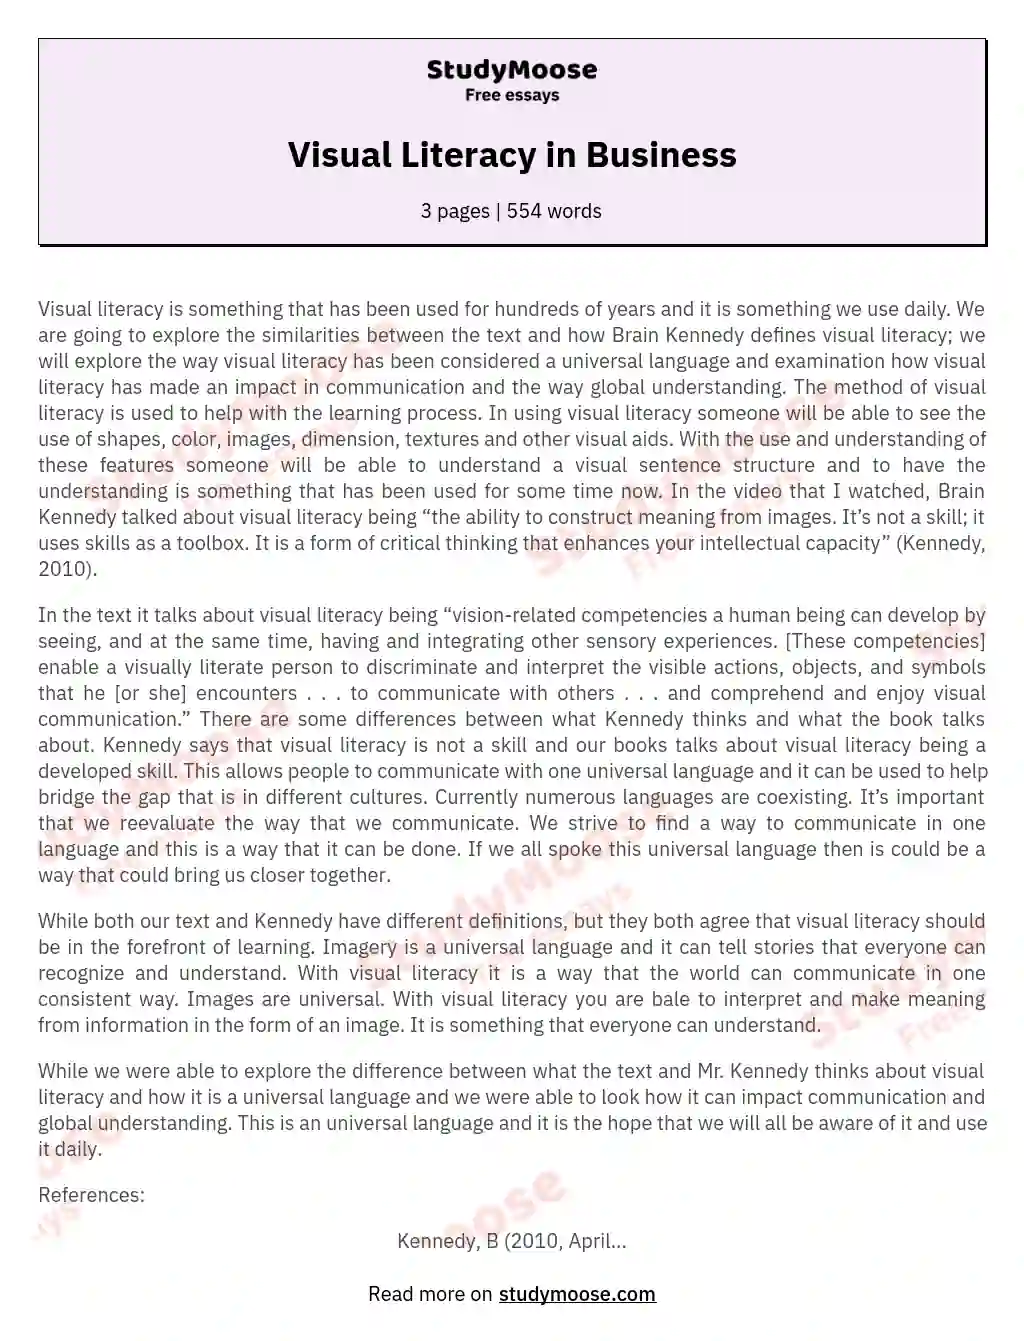 Visual Literacy in Business essay